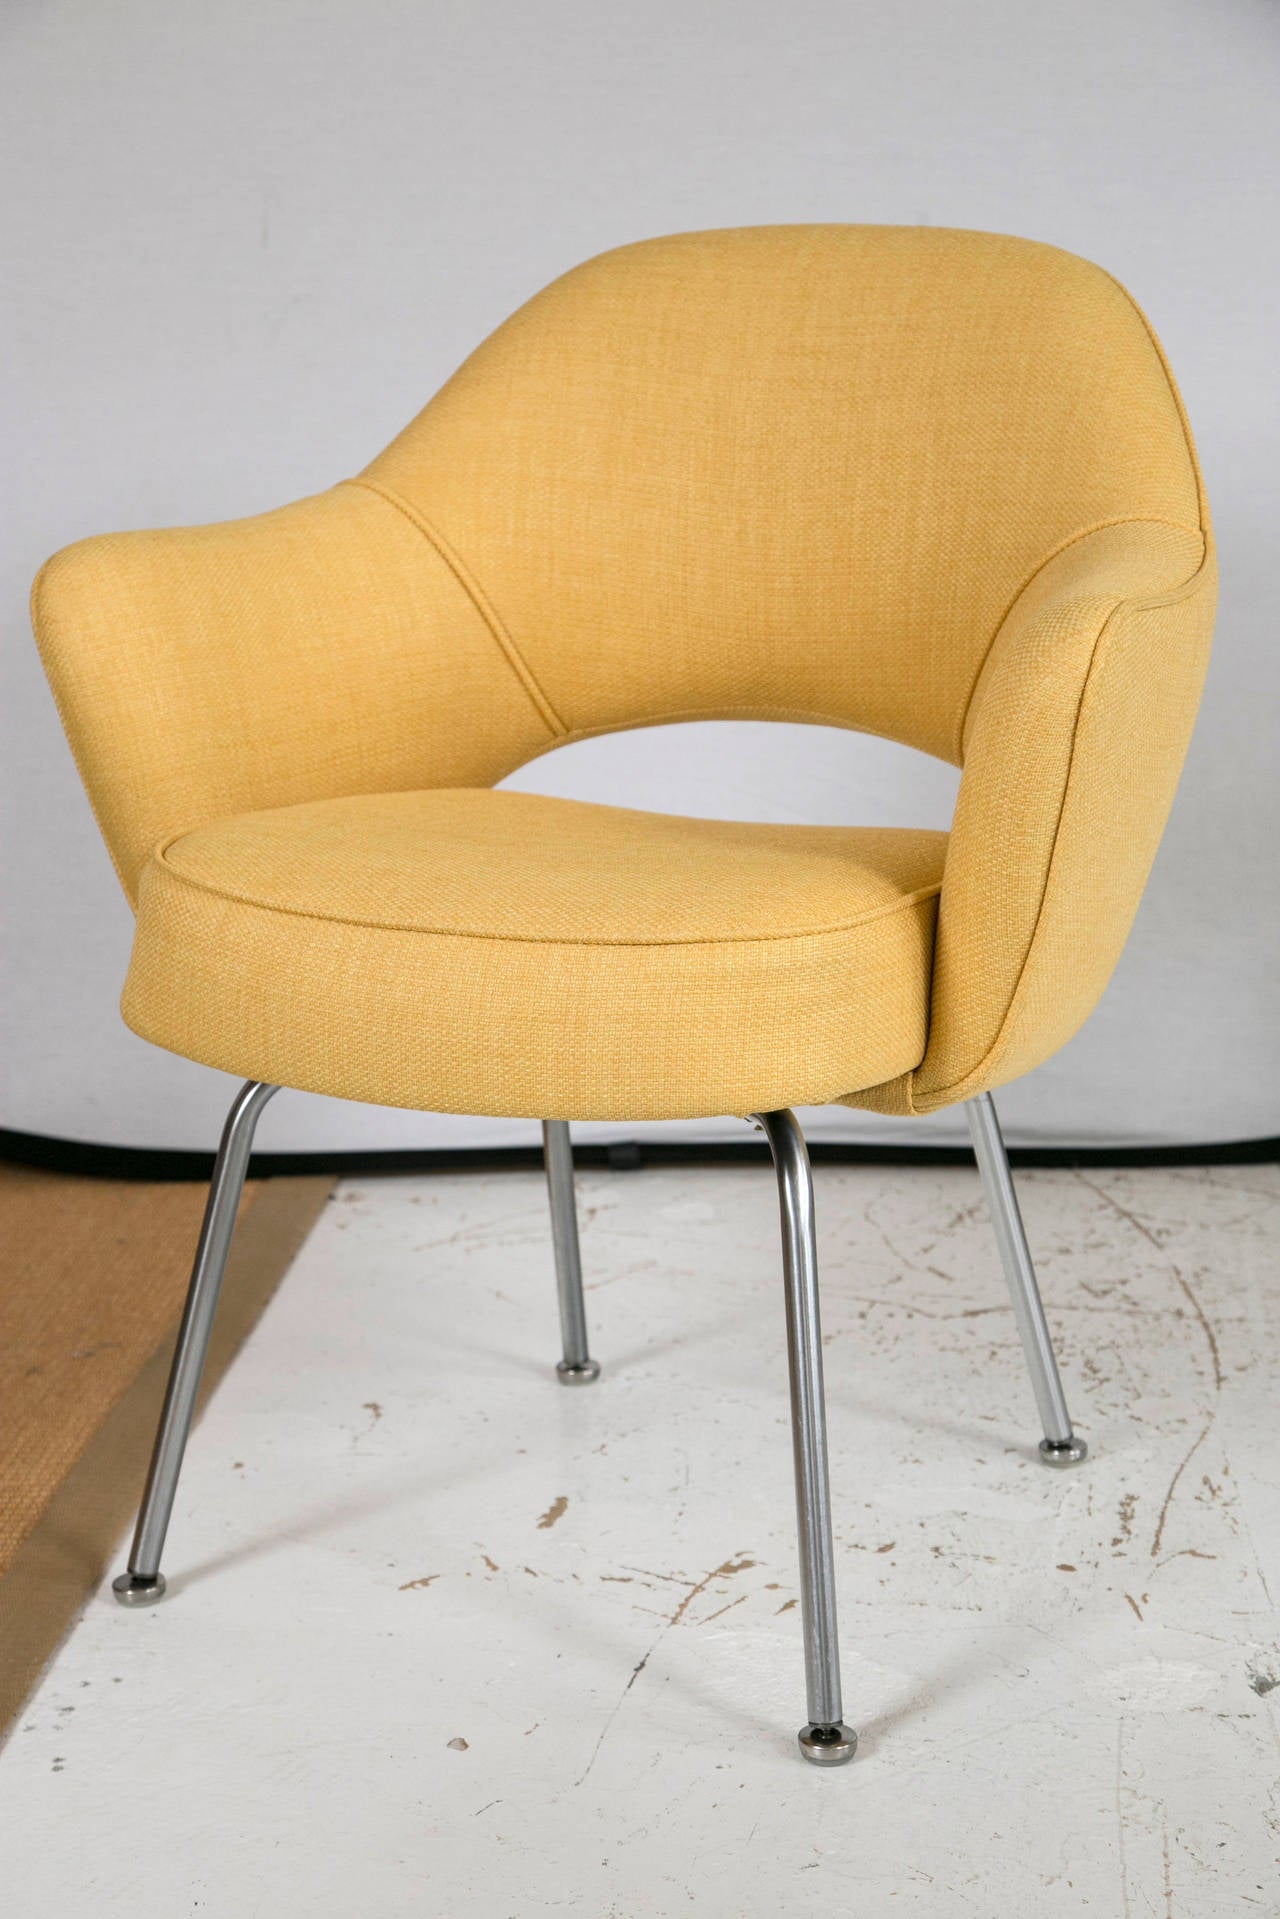 The Mid-Century classic Eero Saarinen Executive Armchair. Manufactured by Knoll Furniture and custom upholstered in a Canary Yellow microfiber. Priced as a single piece, however custom set amounts are available. Please contact us and we would be